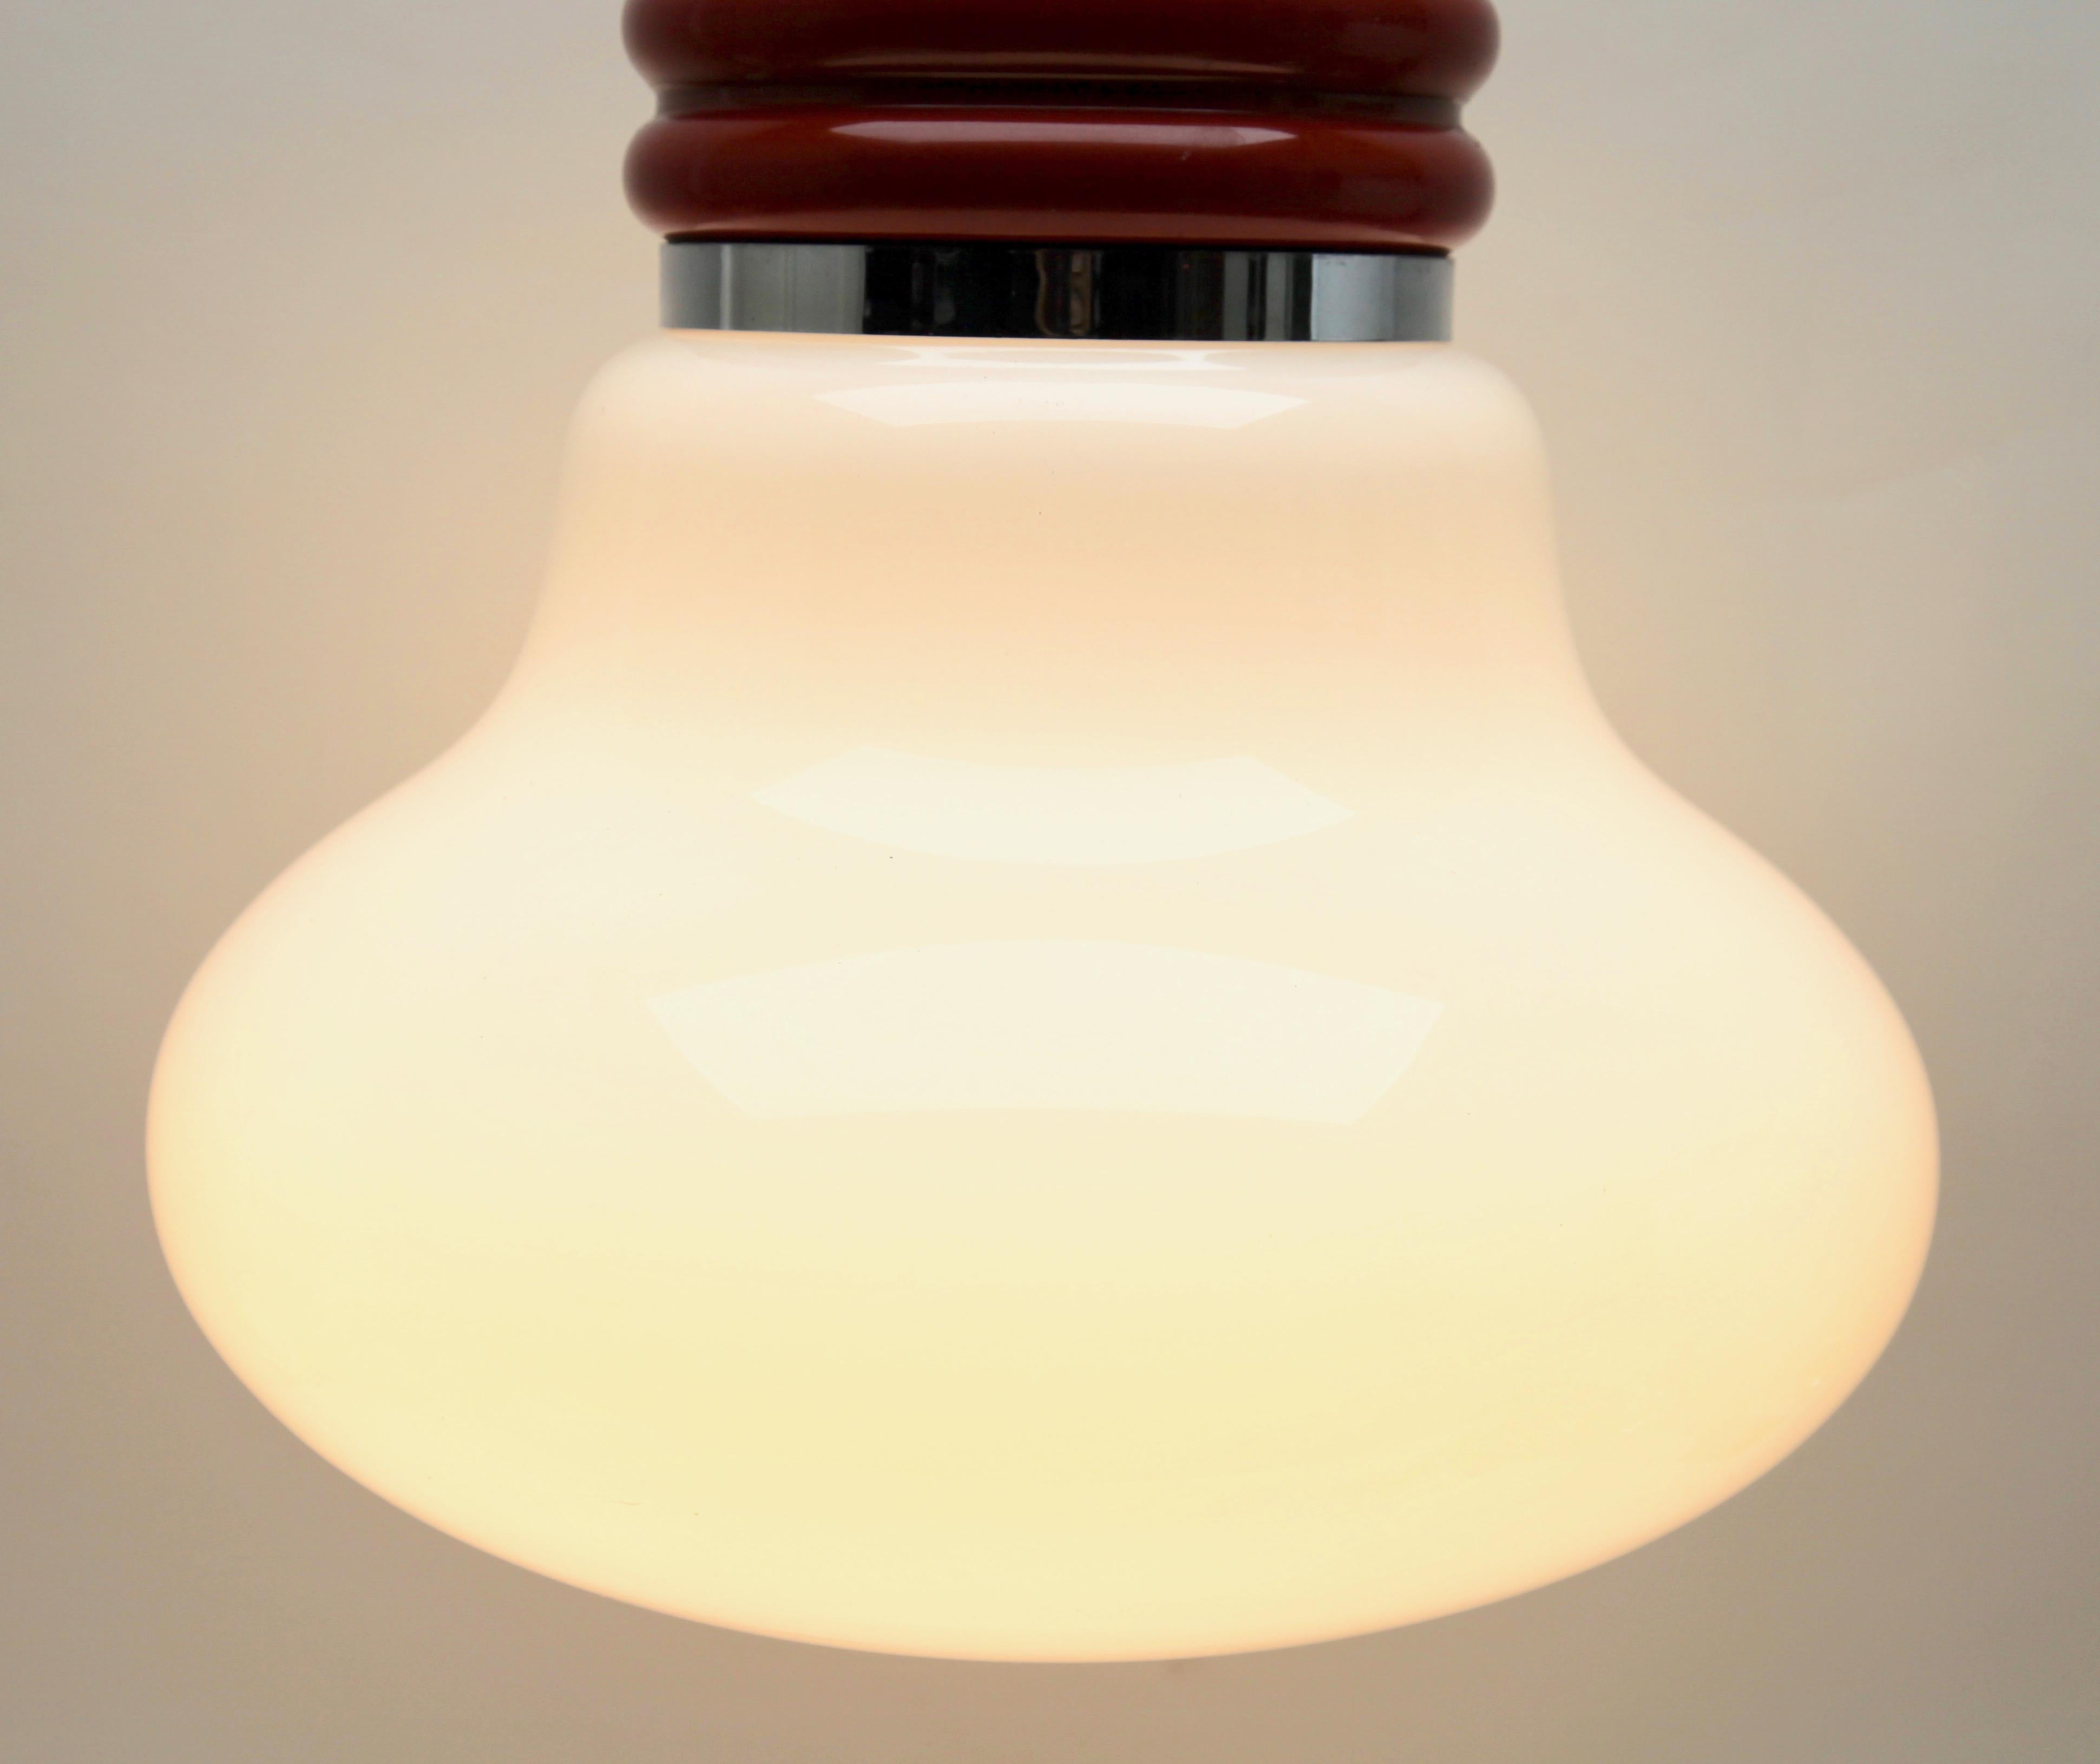 Dutch Vintage Pendant Ceiling Light in the Schape of a Big Bulb, Opaque Glass, 1960s For Sale